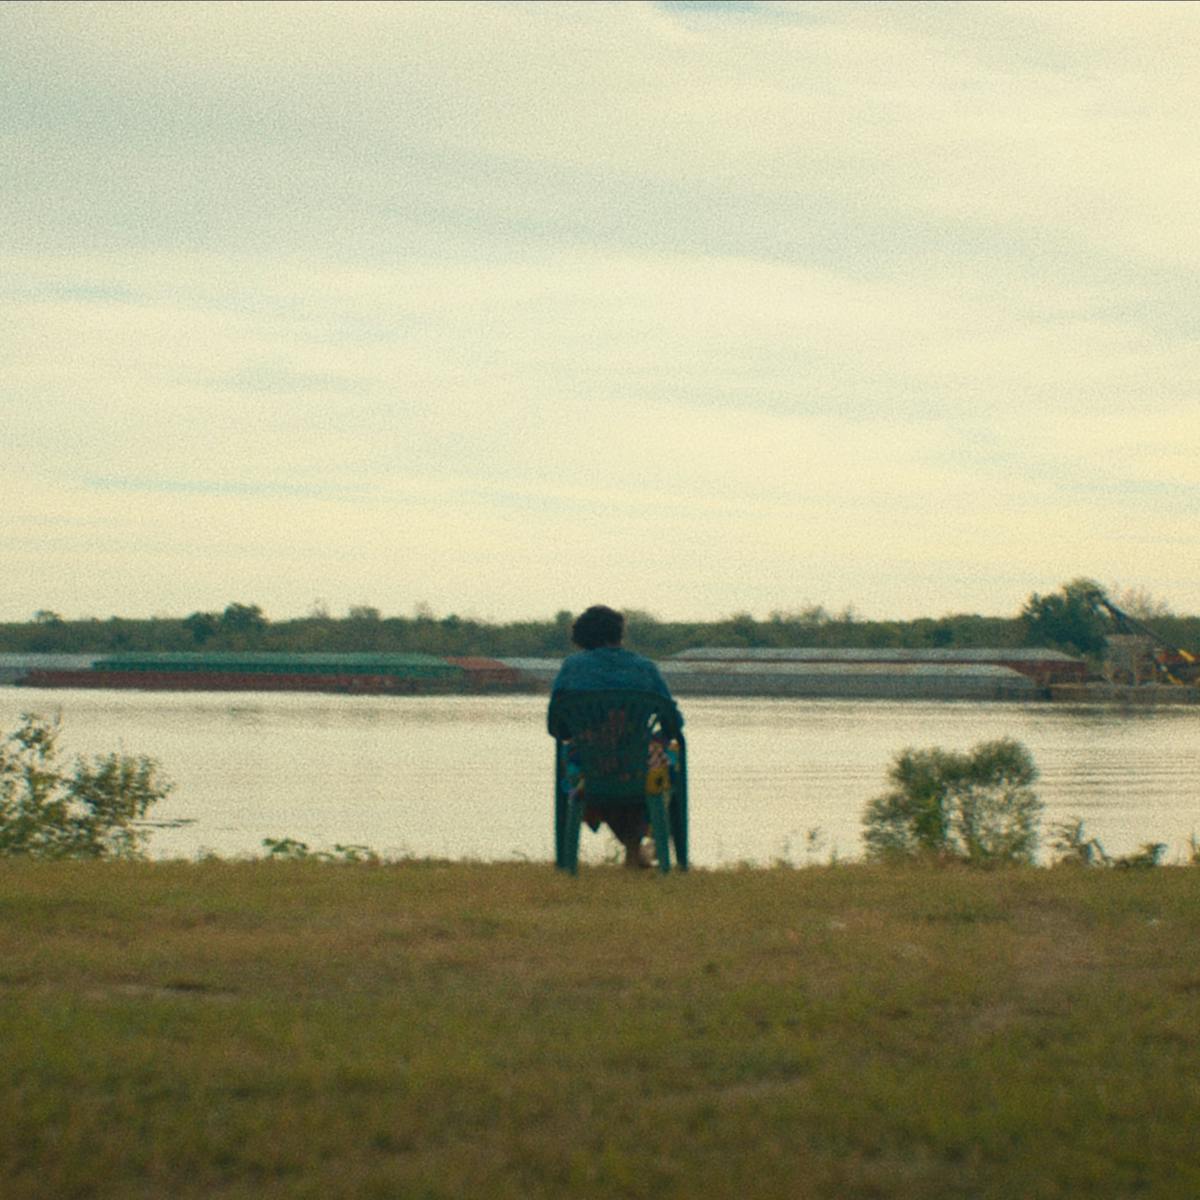 A still from descendant. Someone sits on a chair looking out onto a river.